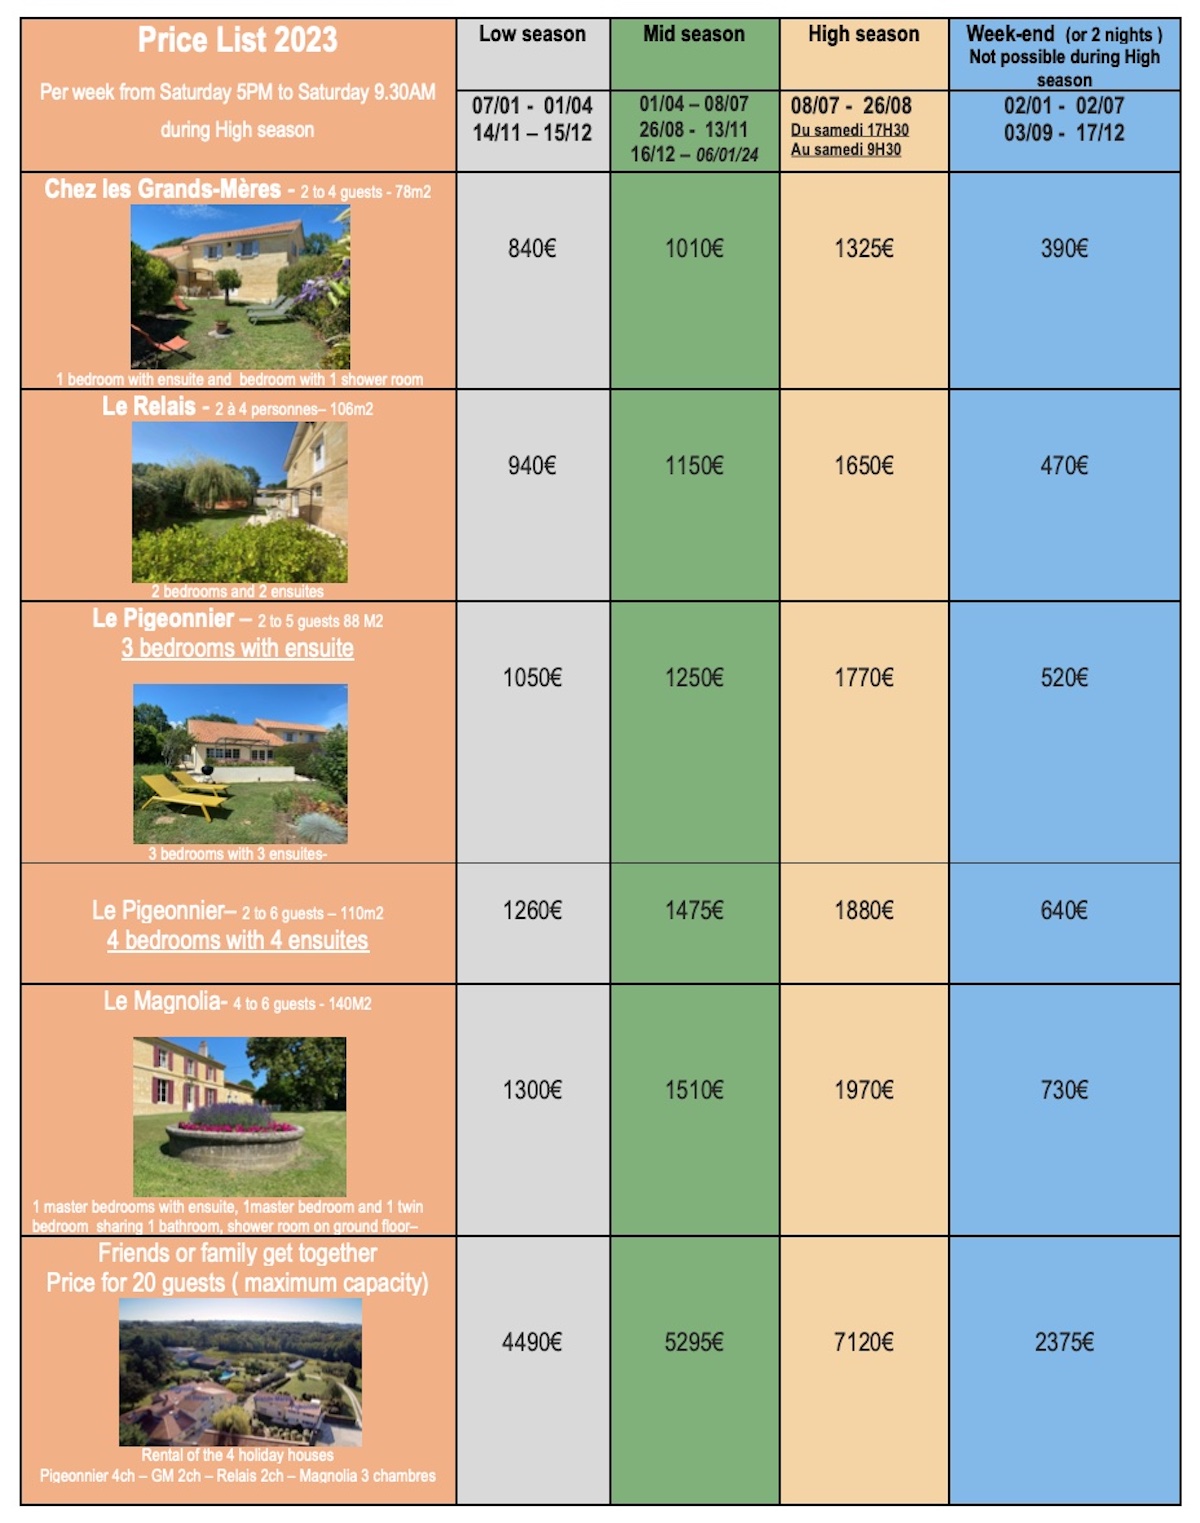 Price liste 2023 Chateau la Gontrie 4 holiday houses on a Bordeaux Family winery